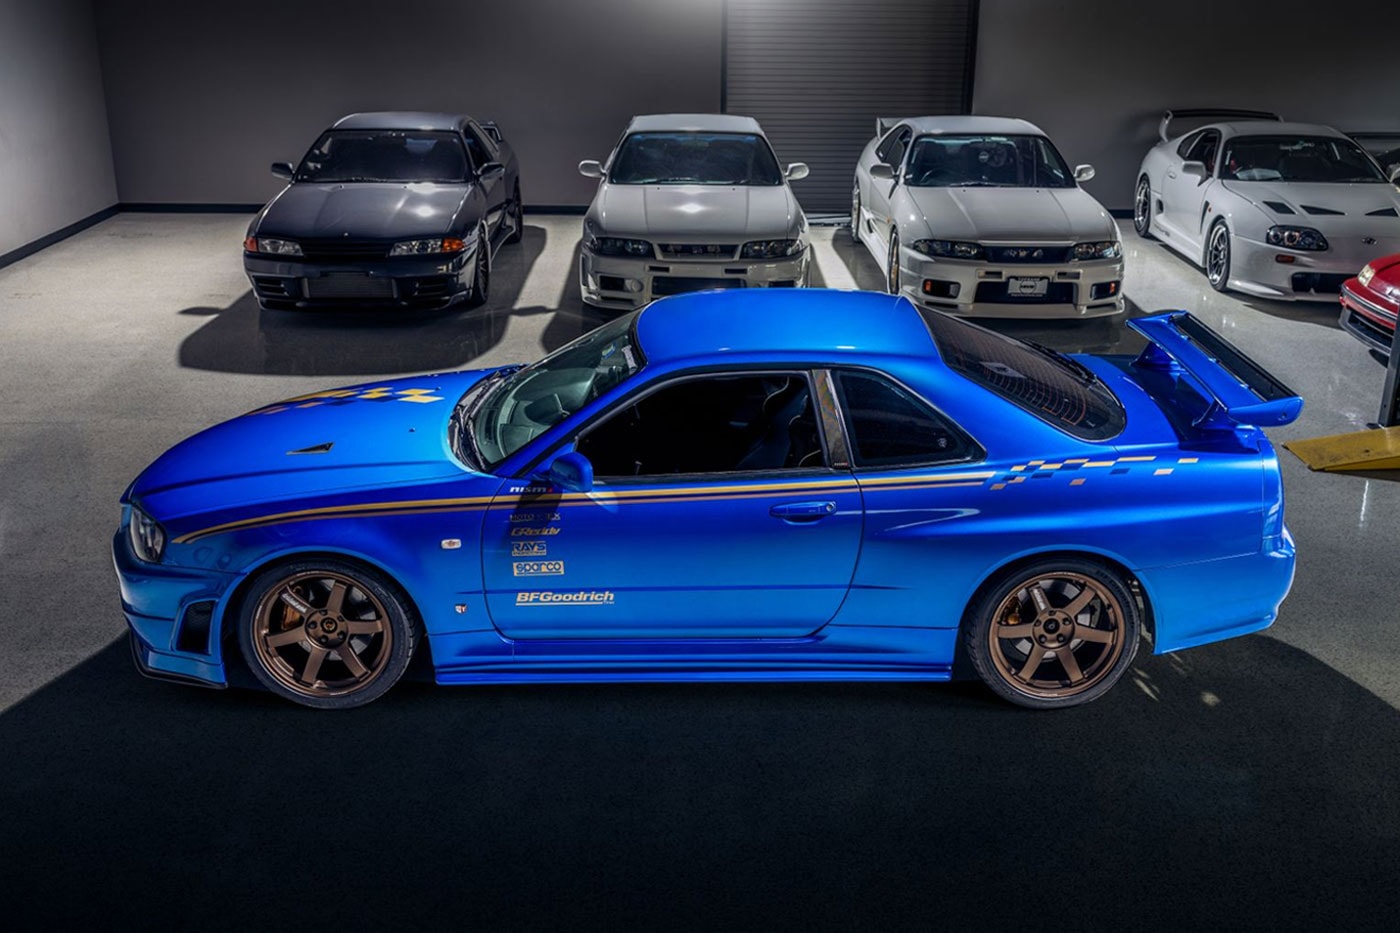 Paul Walker's 'Fast and Furious' Nissan Skyline R34 GT-R Goes Up